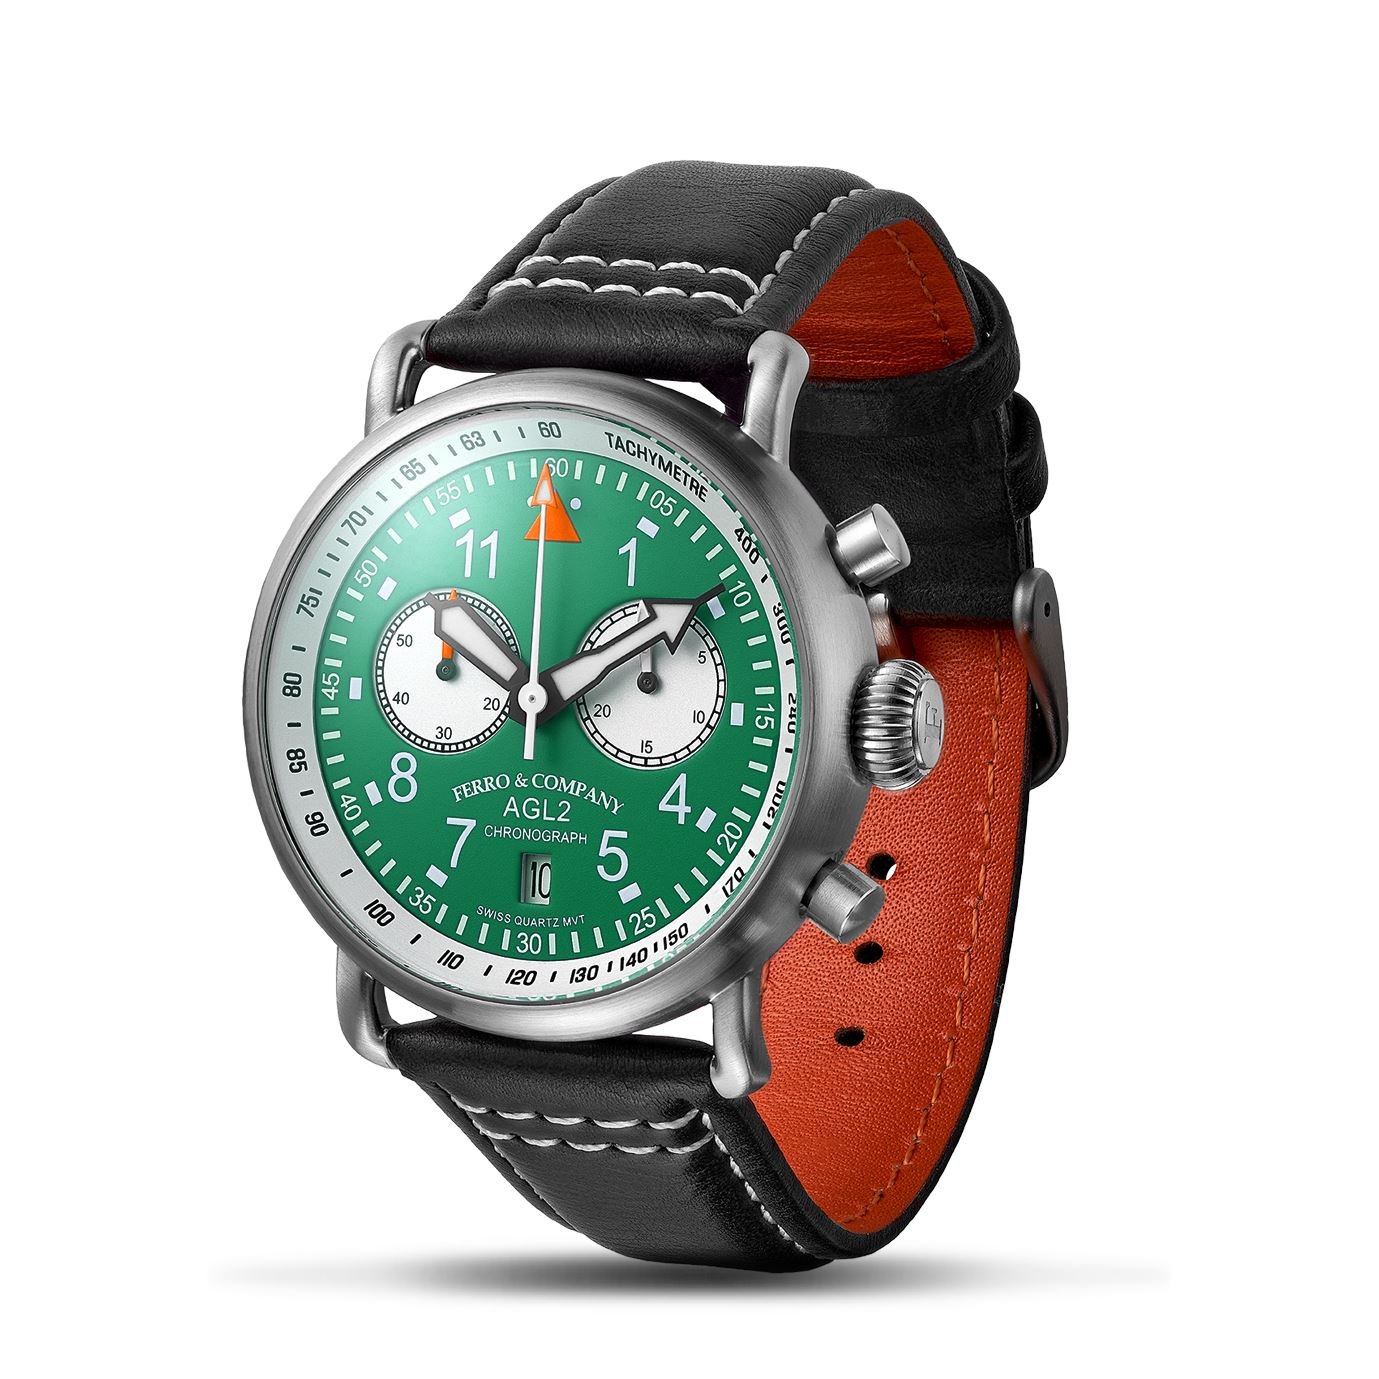 Green Dial Watches - Ferro & Company Watches